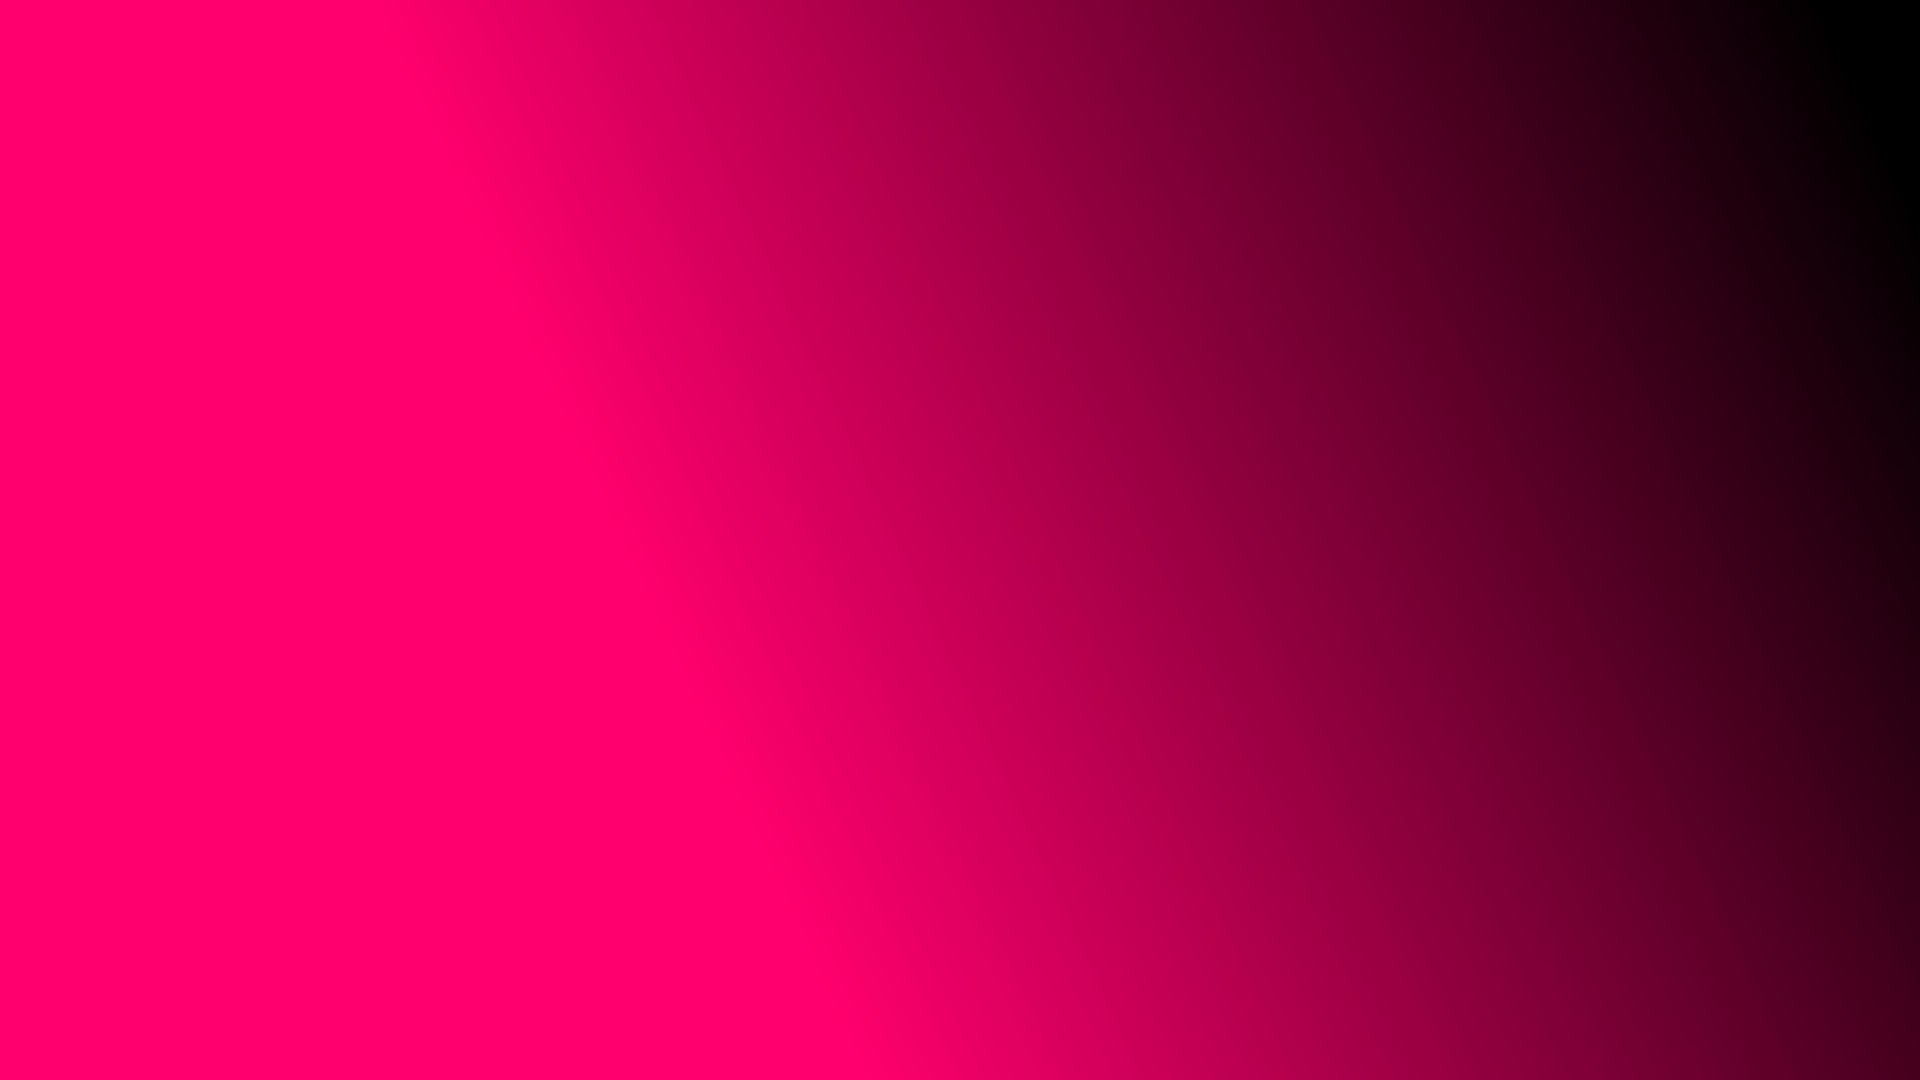  Pink  Black  Backgrounds  60 pictures 